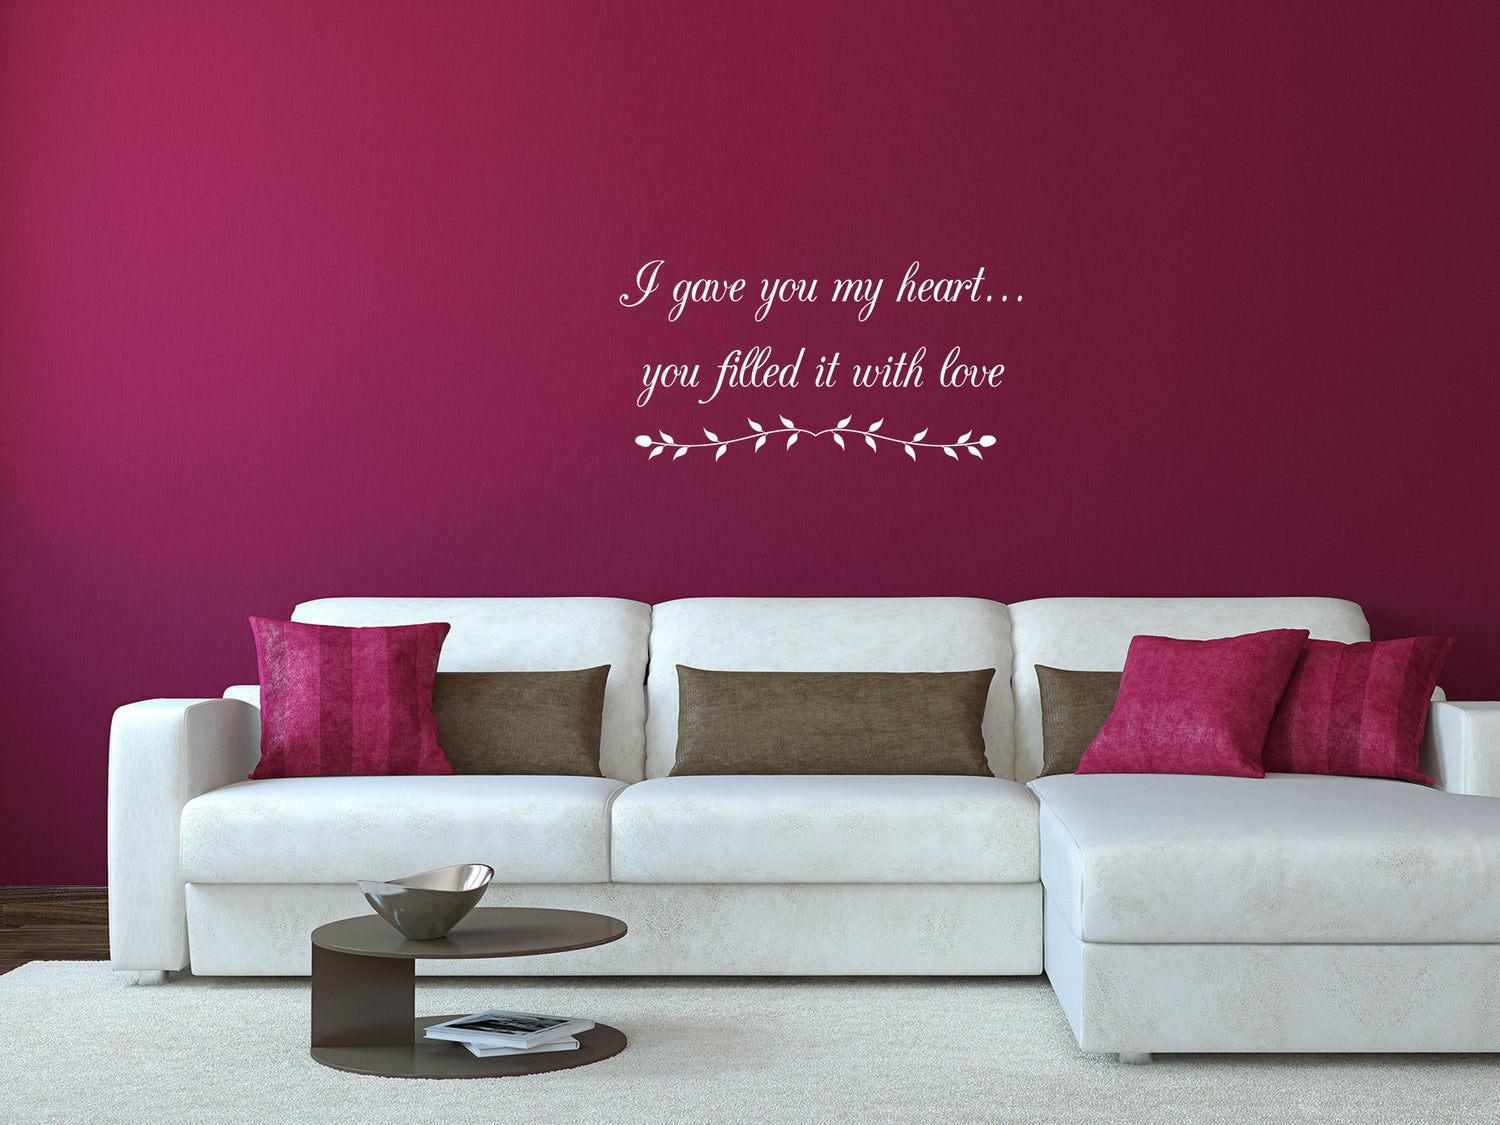 I Gave You My Heart - Inspirational Wall Decals Vinyl Wall Decal Inspirational Wall Signs 